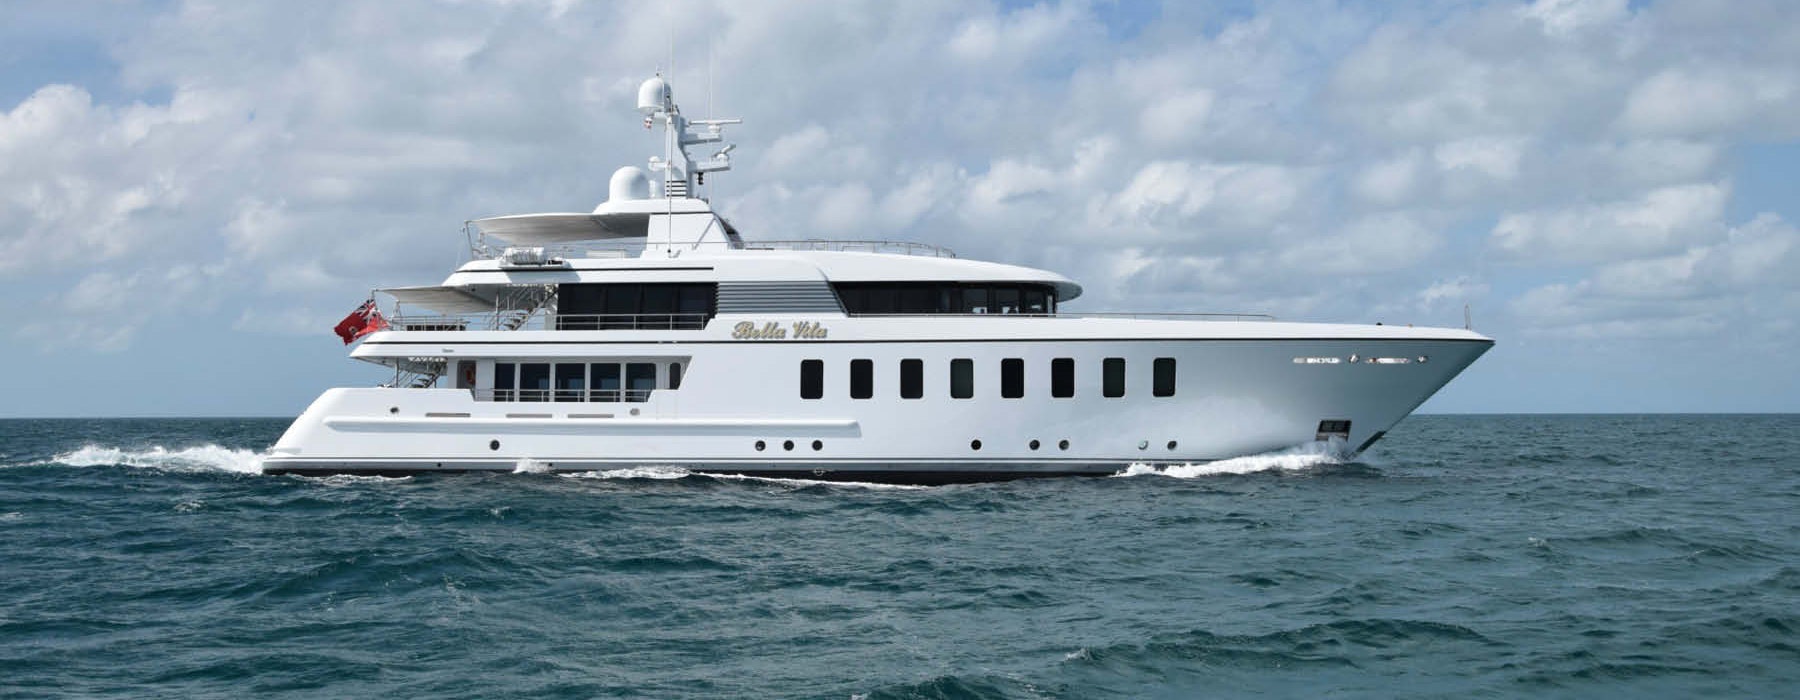 Bella luxury yacht for Sale and Charter